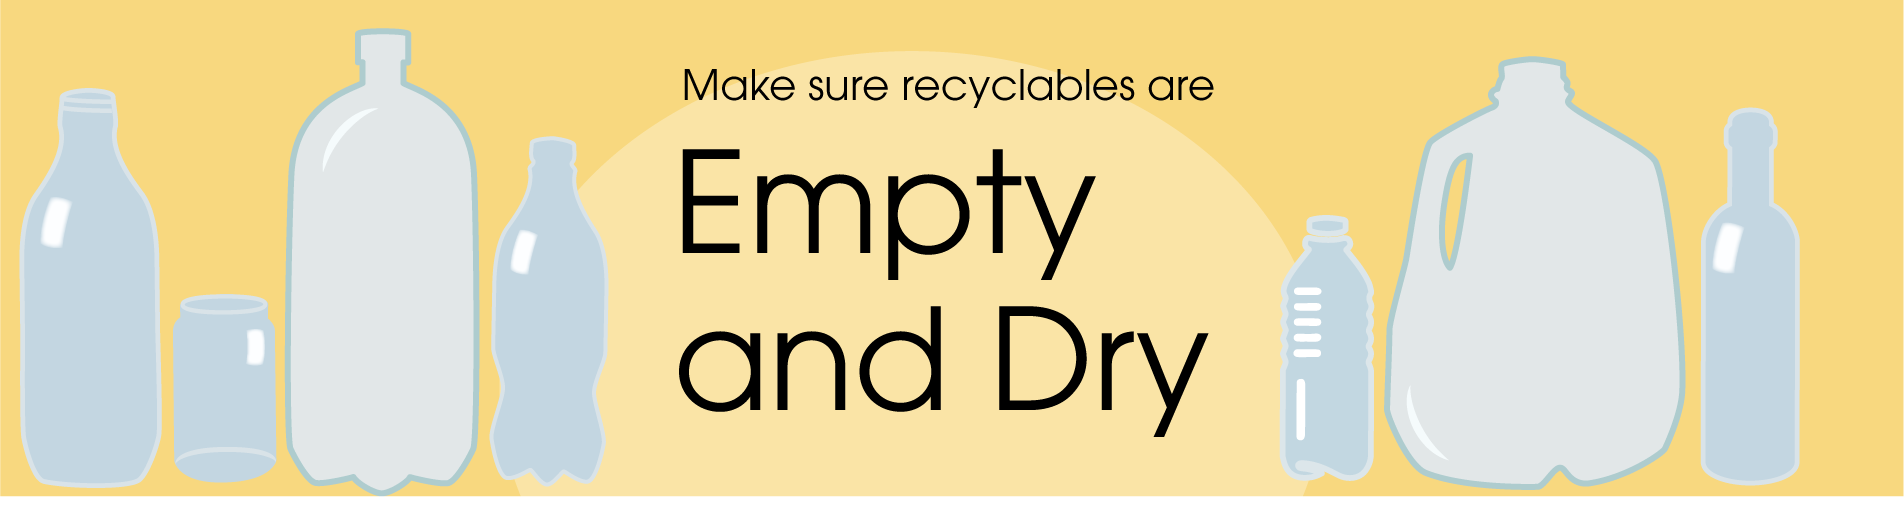 Make sure recyclables are empty and dry